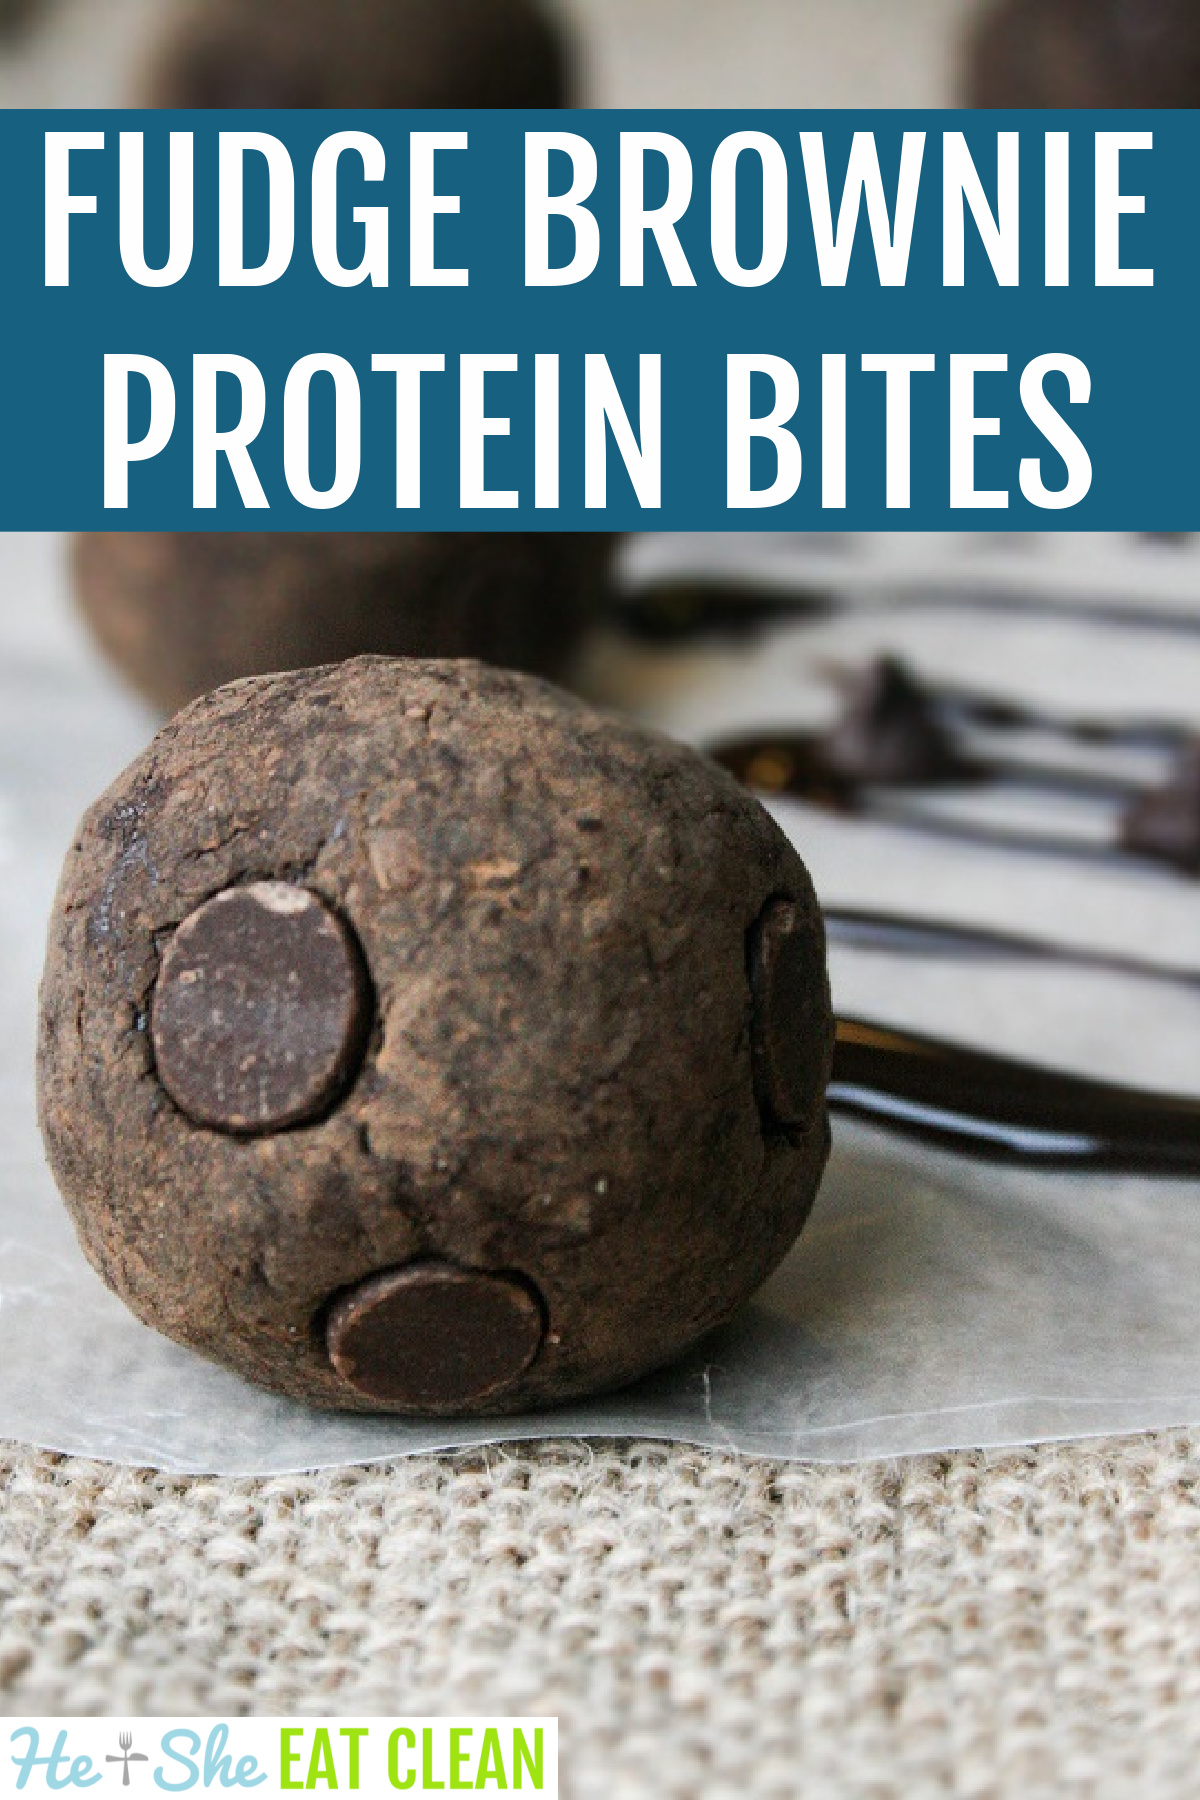 one protein bite/ball with chocolate chips text reads Fudge Brownie Protein Bites